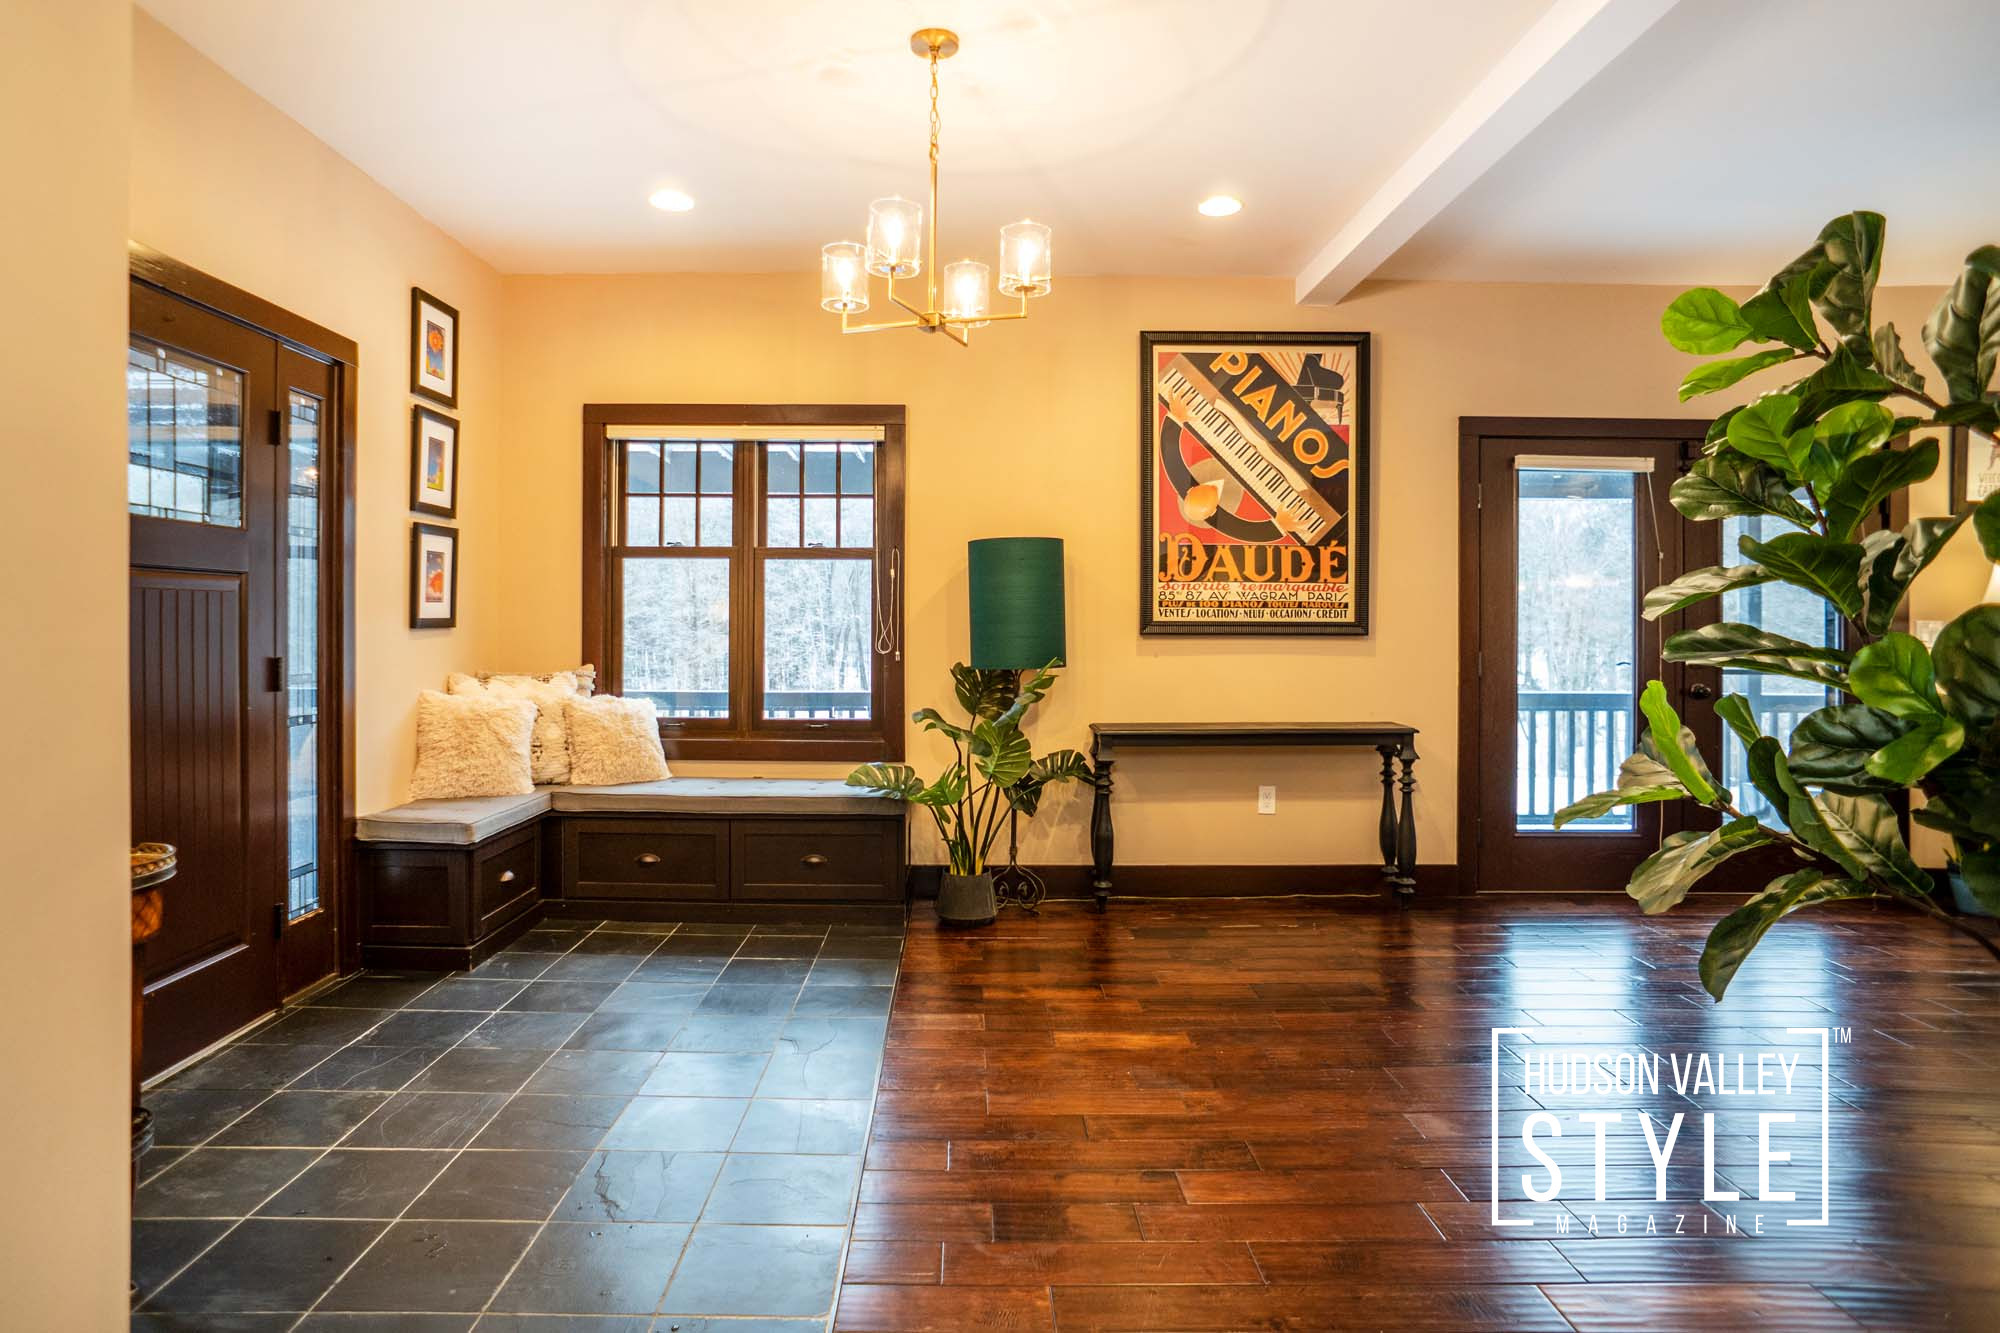 Hudson Valley Style Magazine Photo Gallery – Featured Hudson Valley Home for Sale in Catskill, NY – Real Estate Photography by Alluvion Real Estate